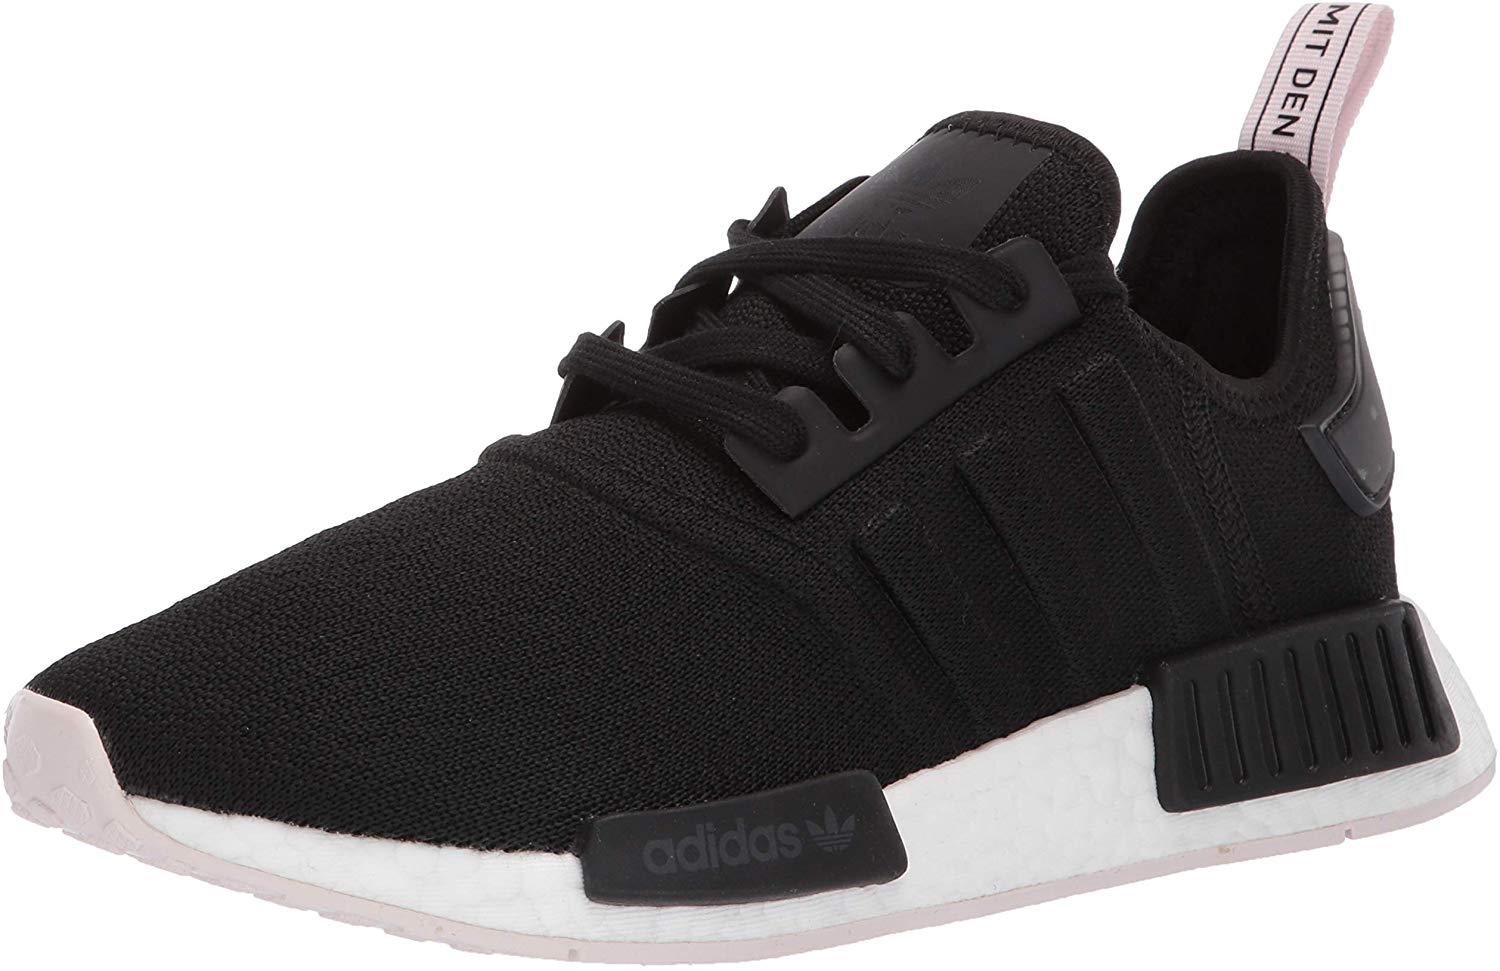 nmd black orchid tint